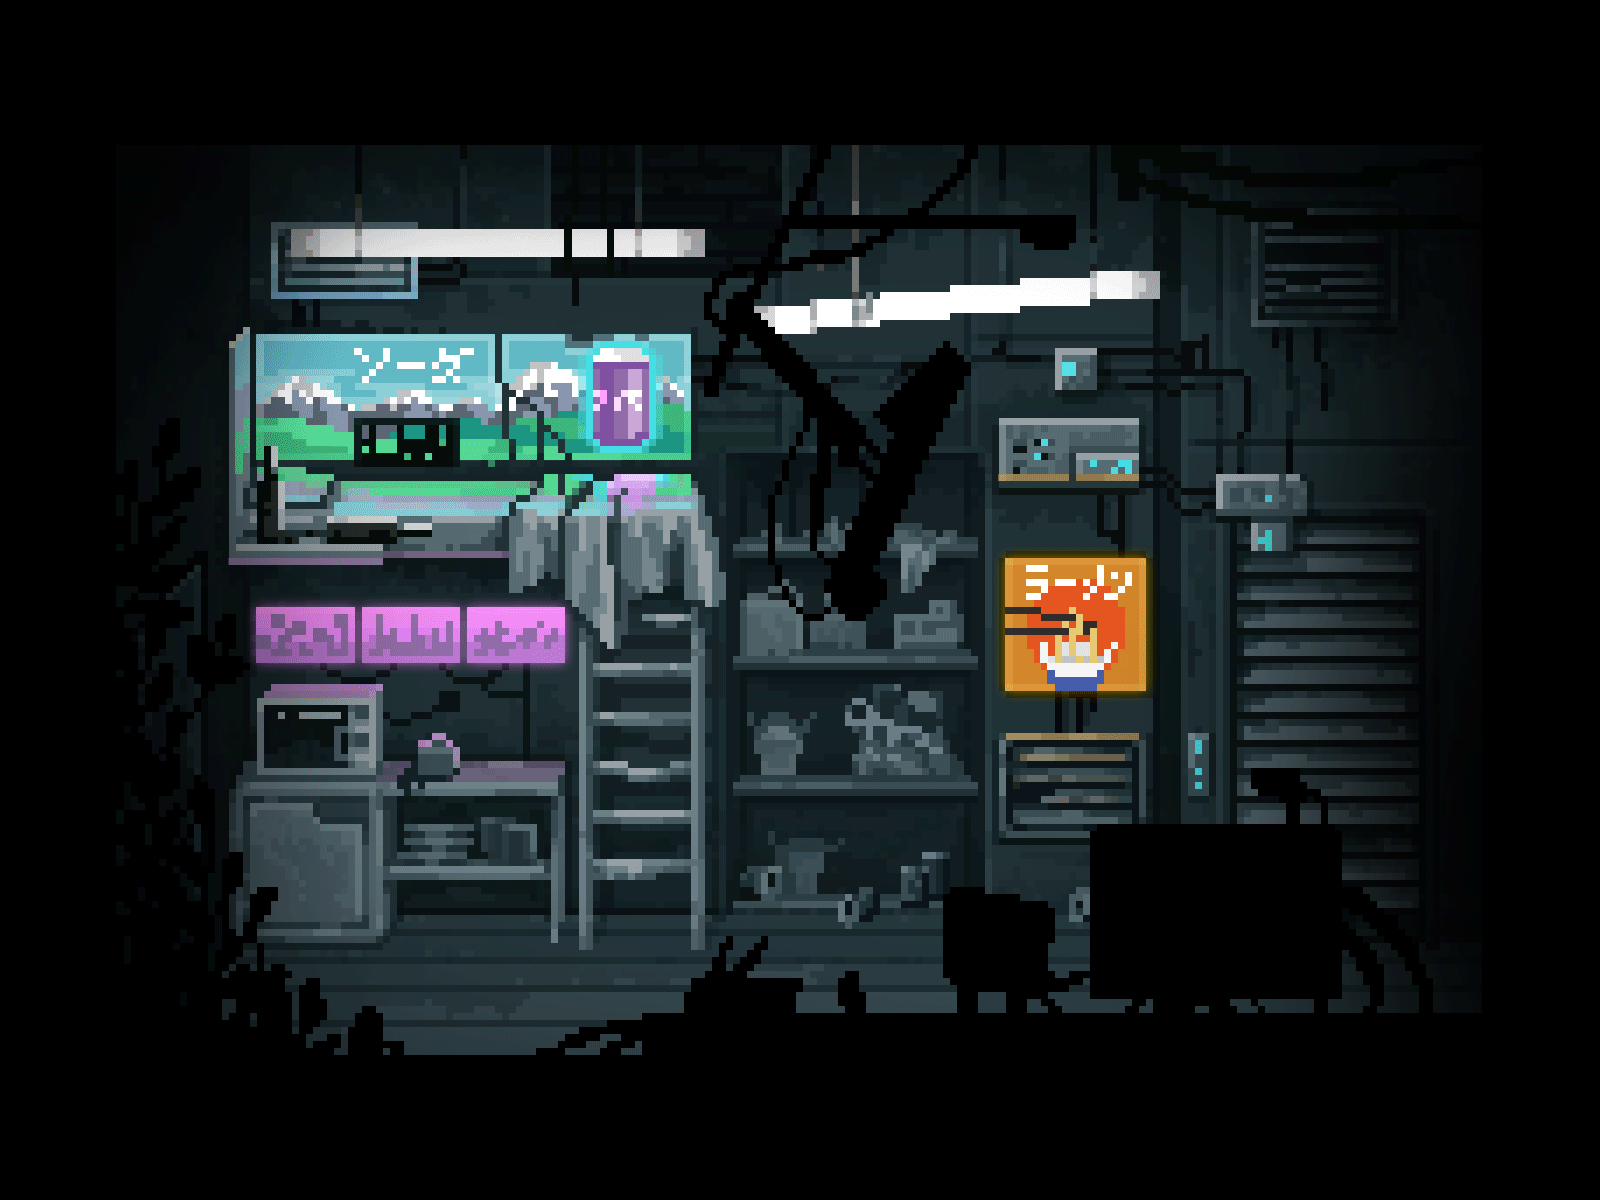 Pixel art bathroom for a cyberpunk indie game by Margarita Solianova on  Dribbble